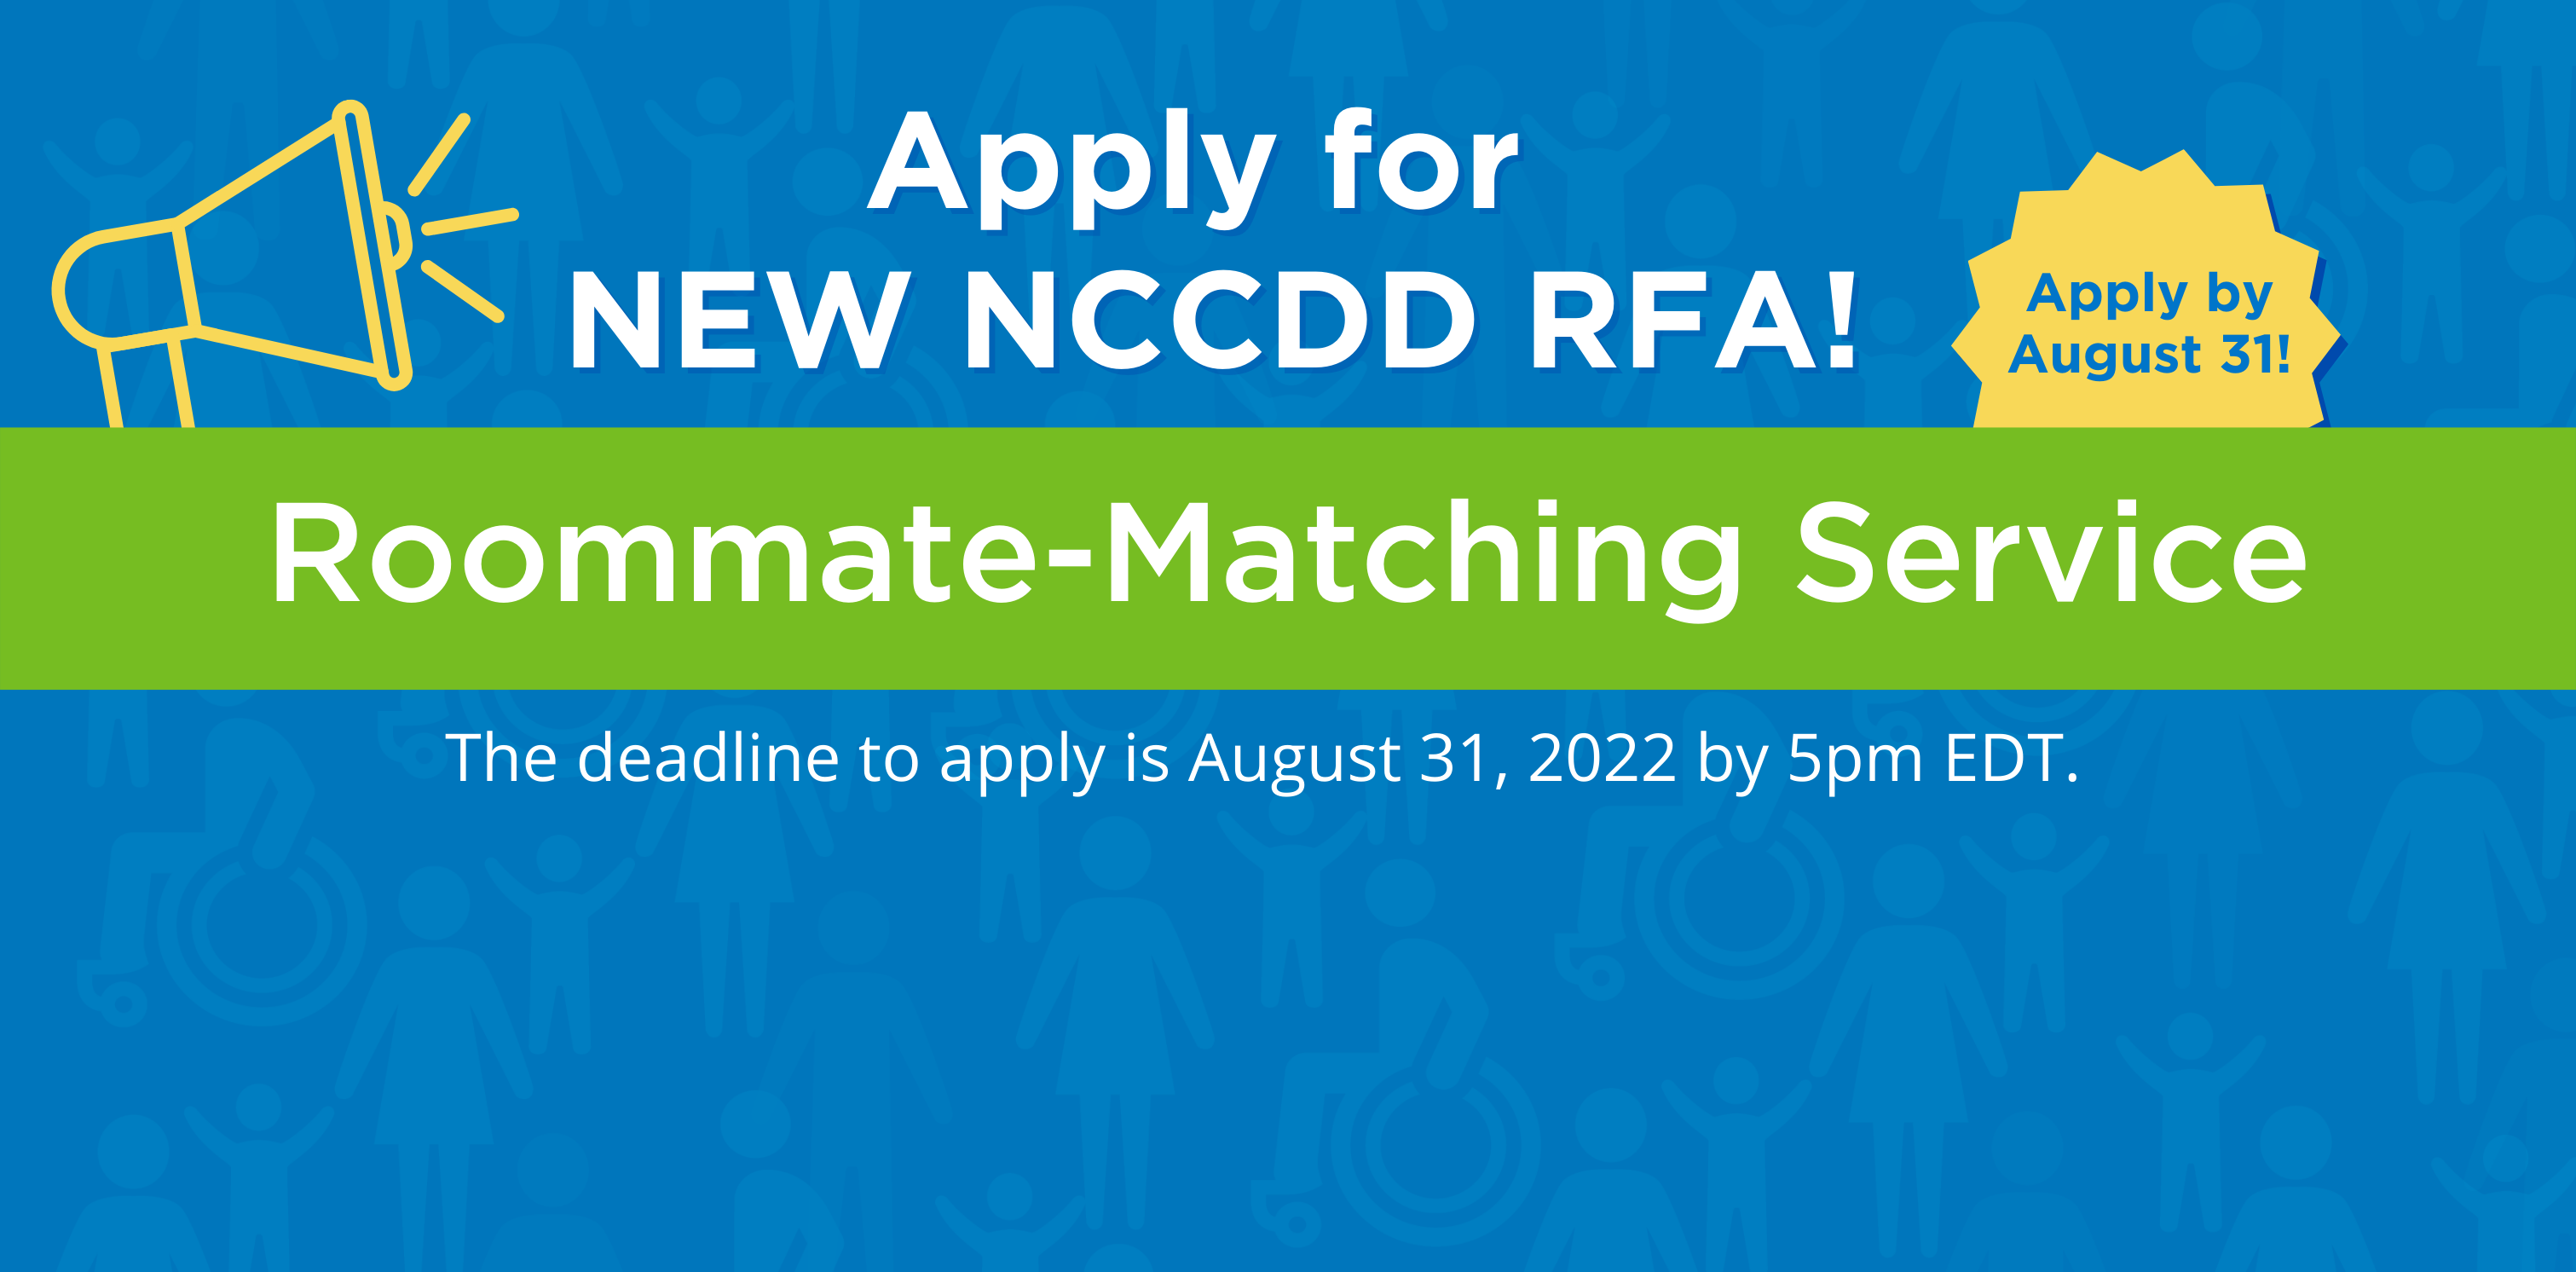 NCCDD Announces Deadline has been extended for New RFA to noon 7/15/21. The Unmet Needs Initiative: A Coordinated Campaign to Impact the Registry of Unmet Needs